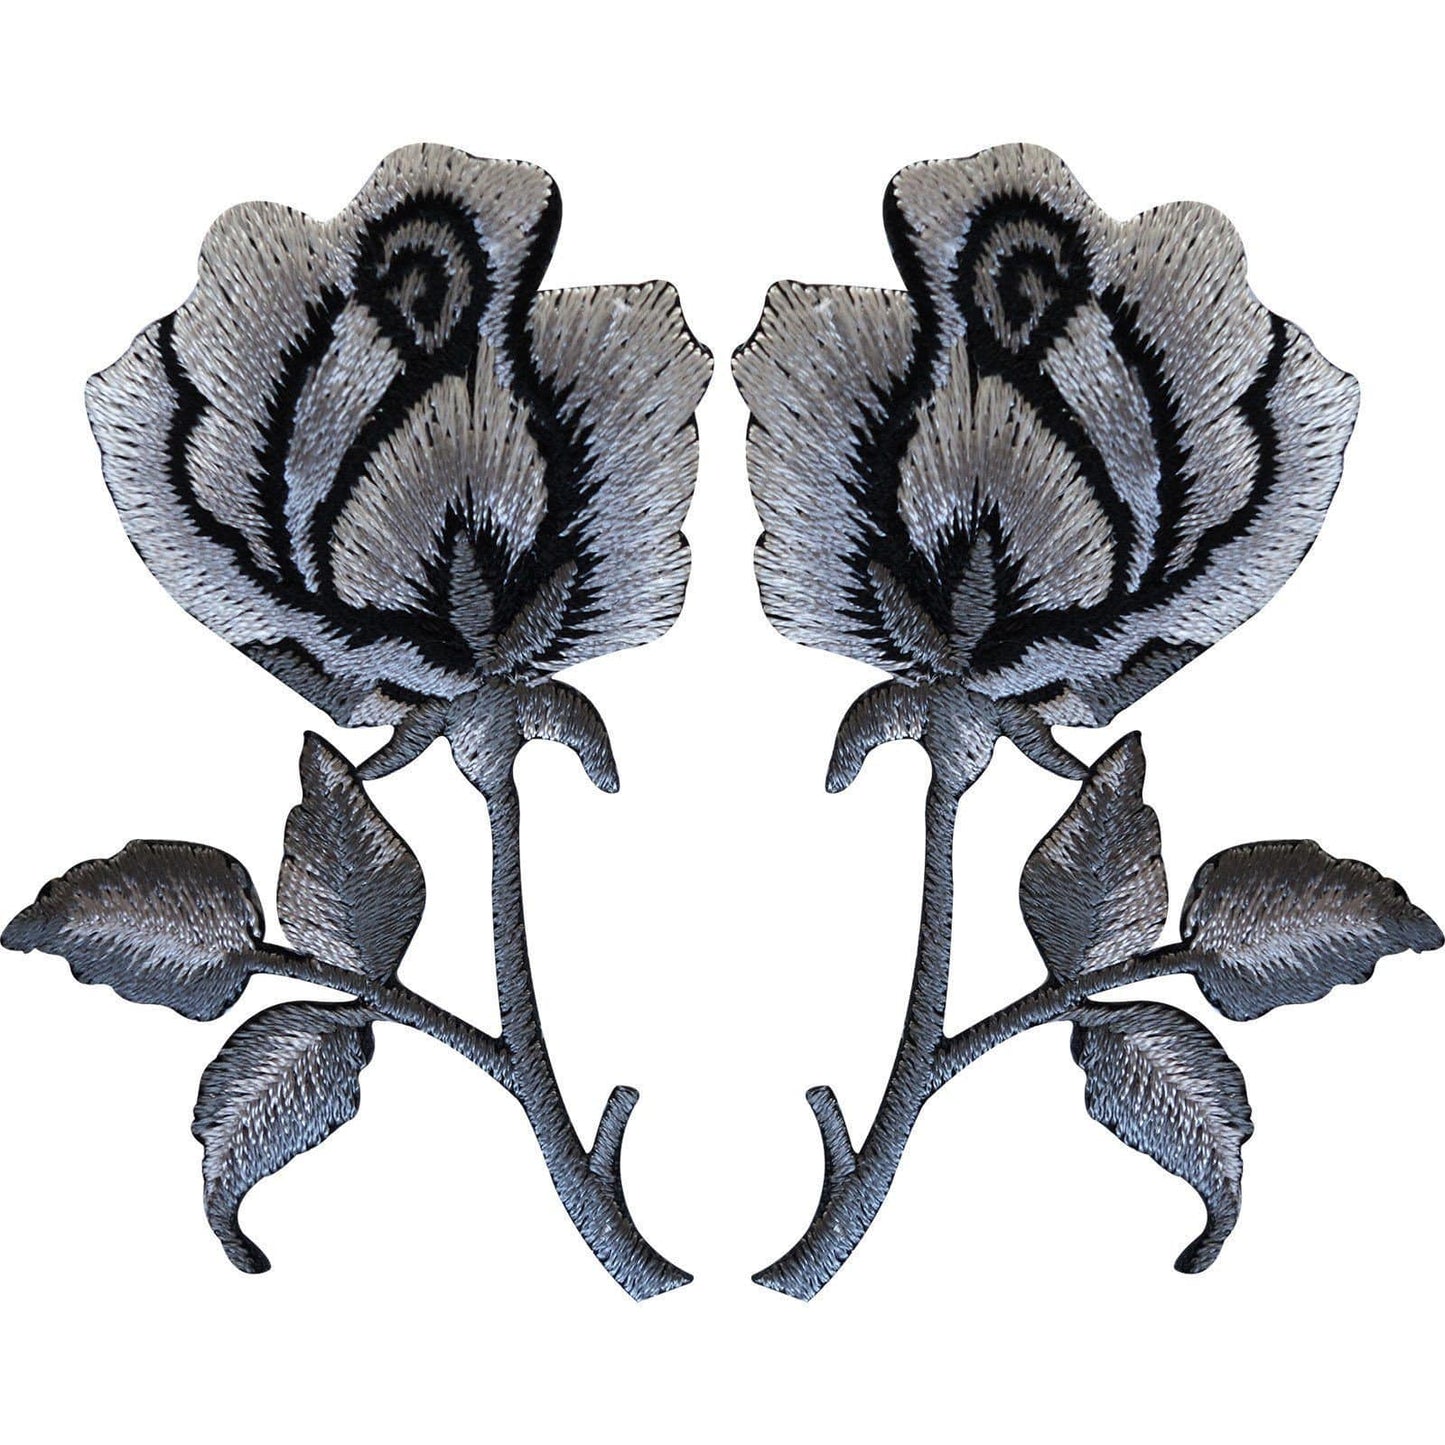 Pair of Rose Flowers Embroidered Iron Sew On Patch Badge Silver Grey Black Roses